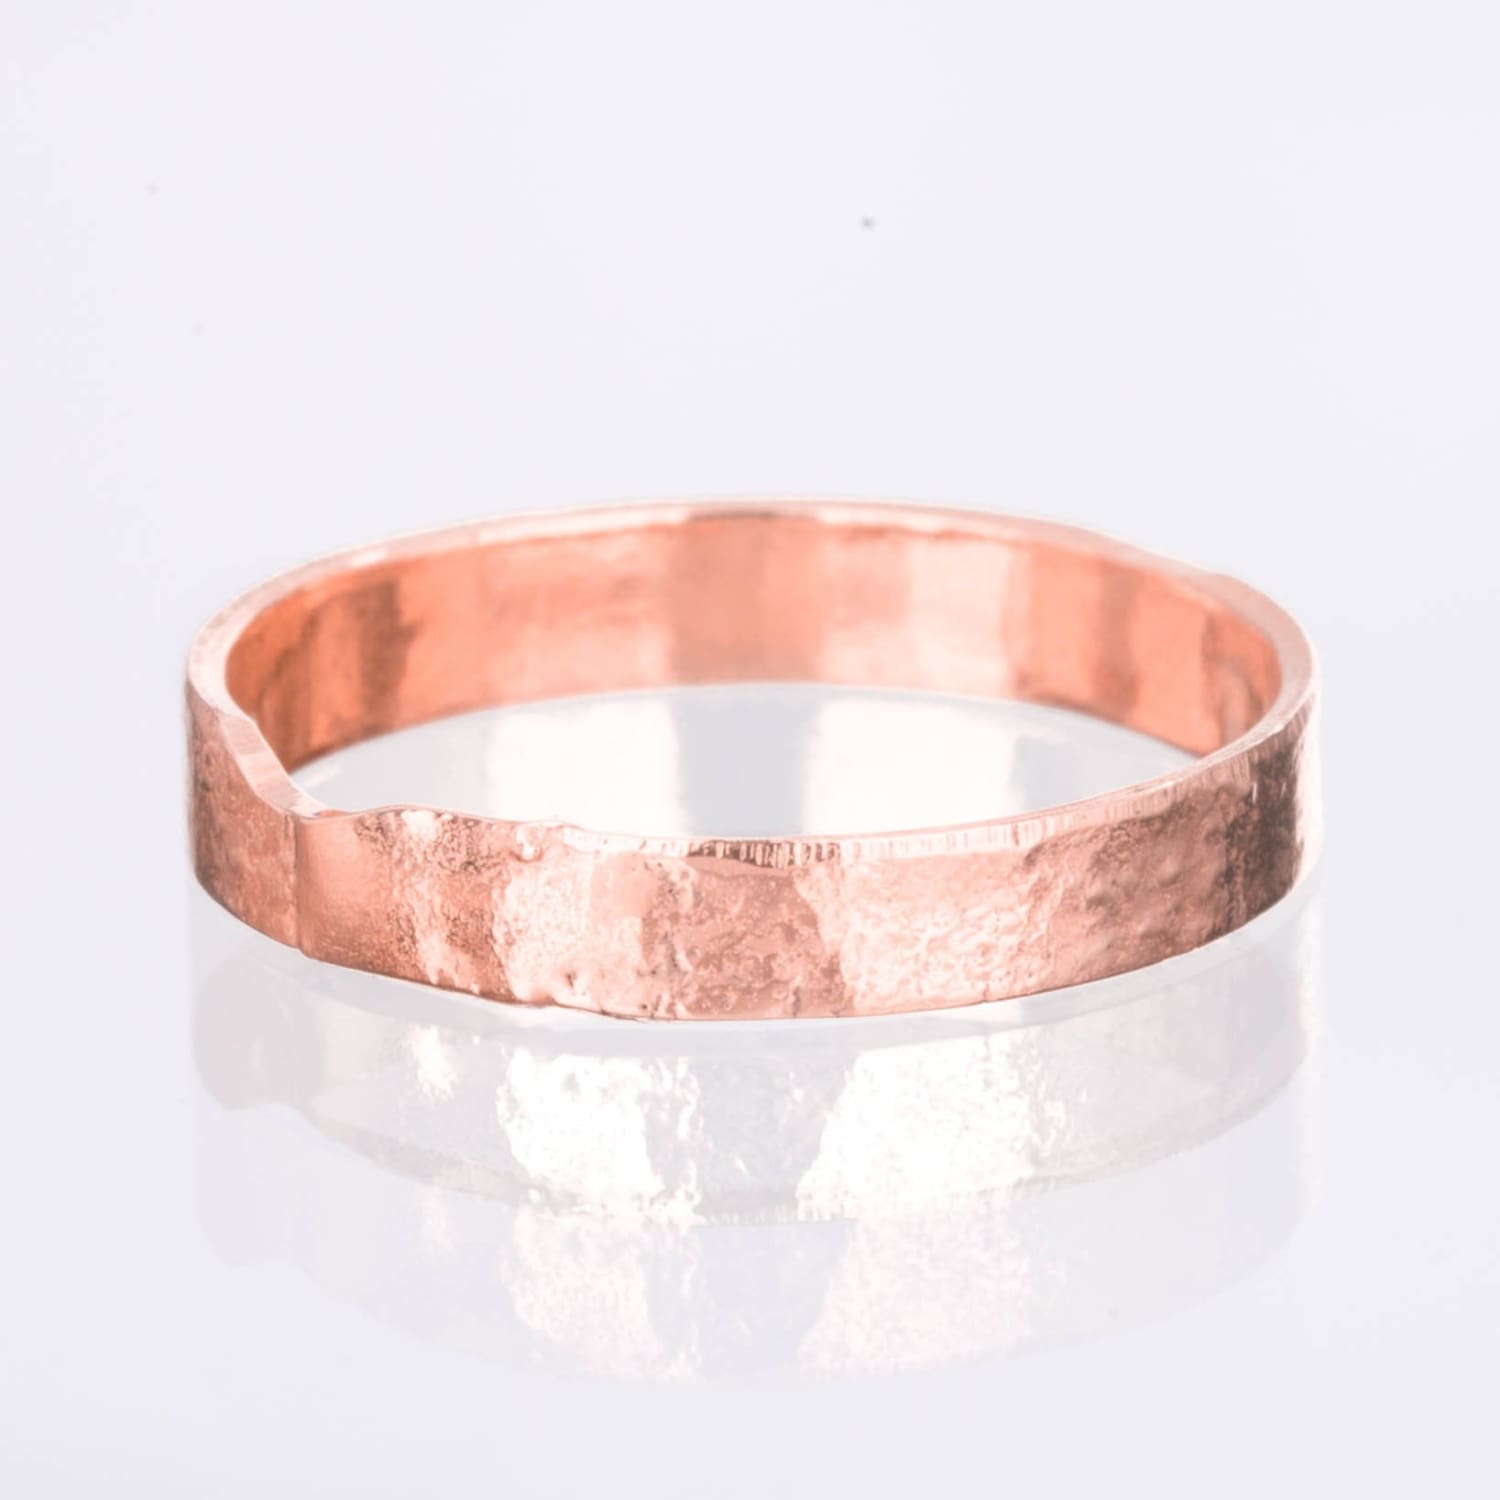 3mm Rose Gold Textured Band Raw Gemstone Jewelry Rough